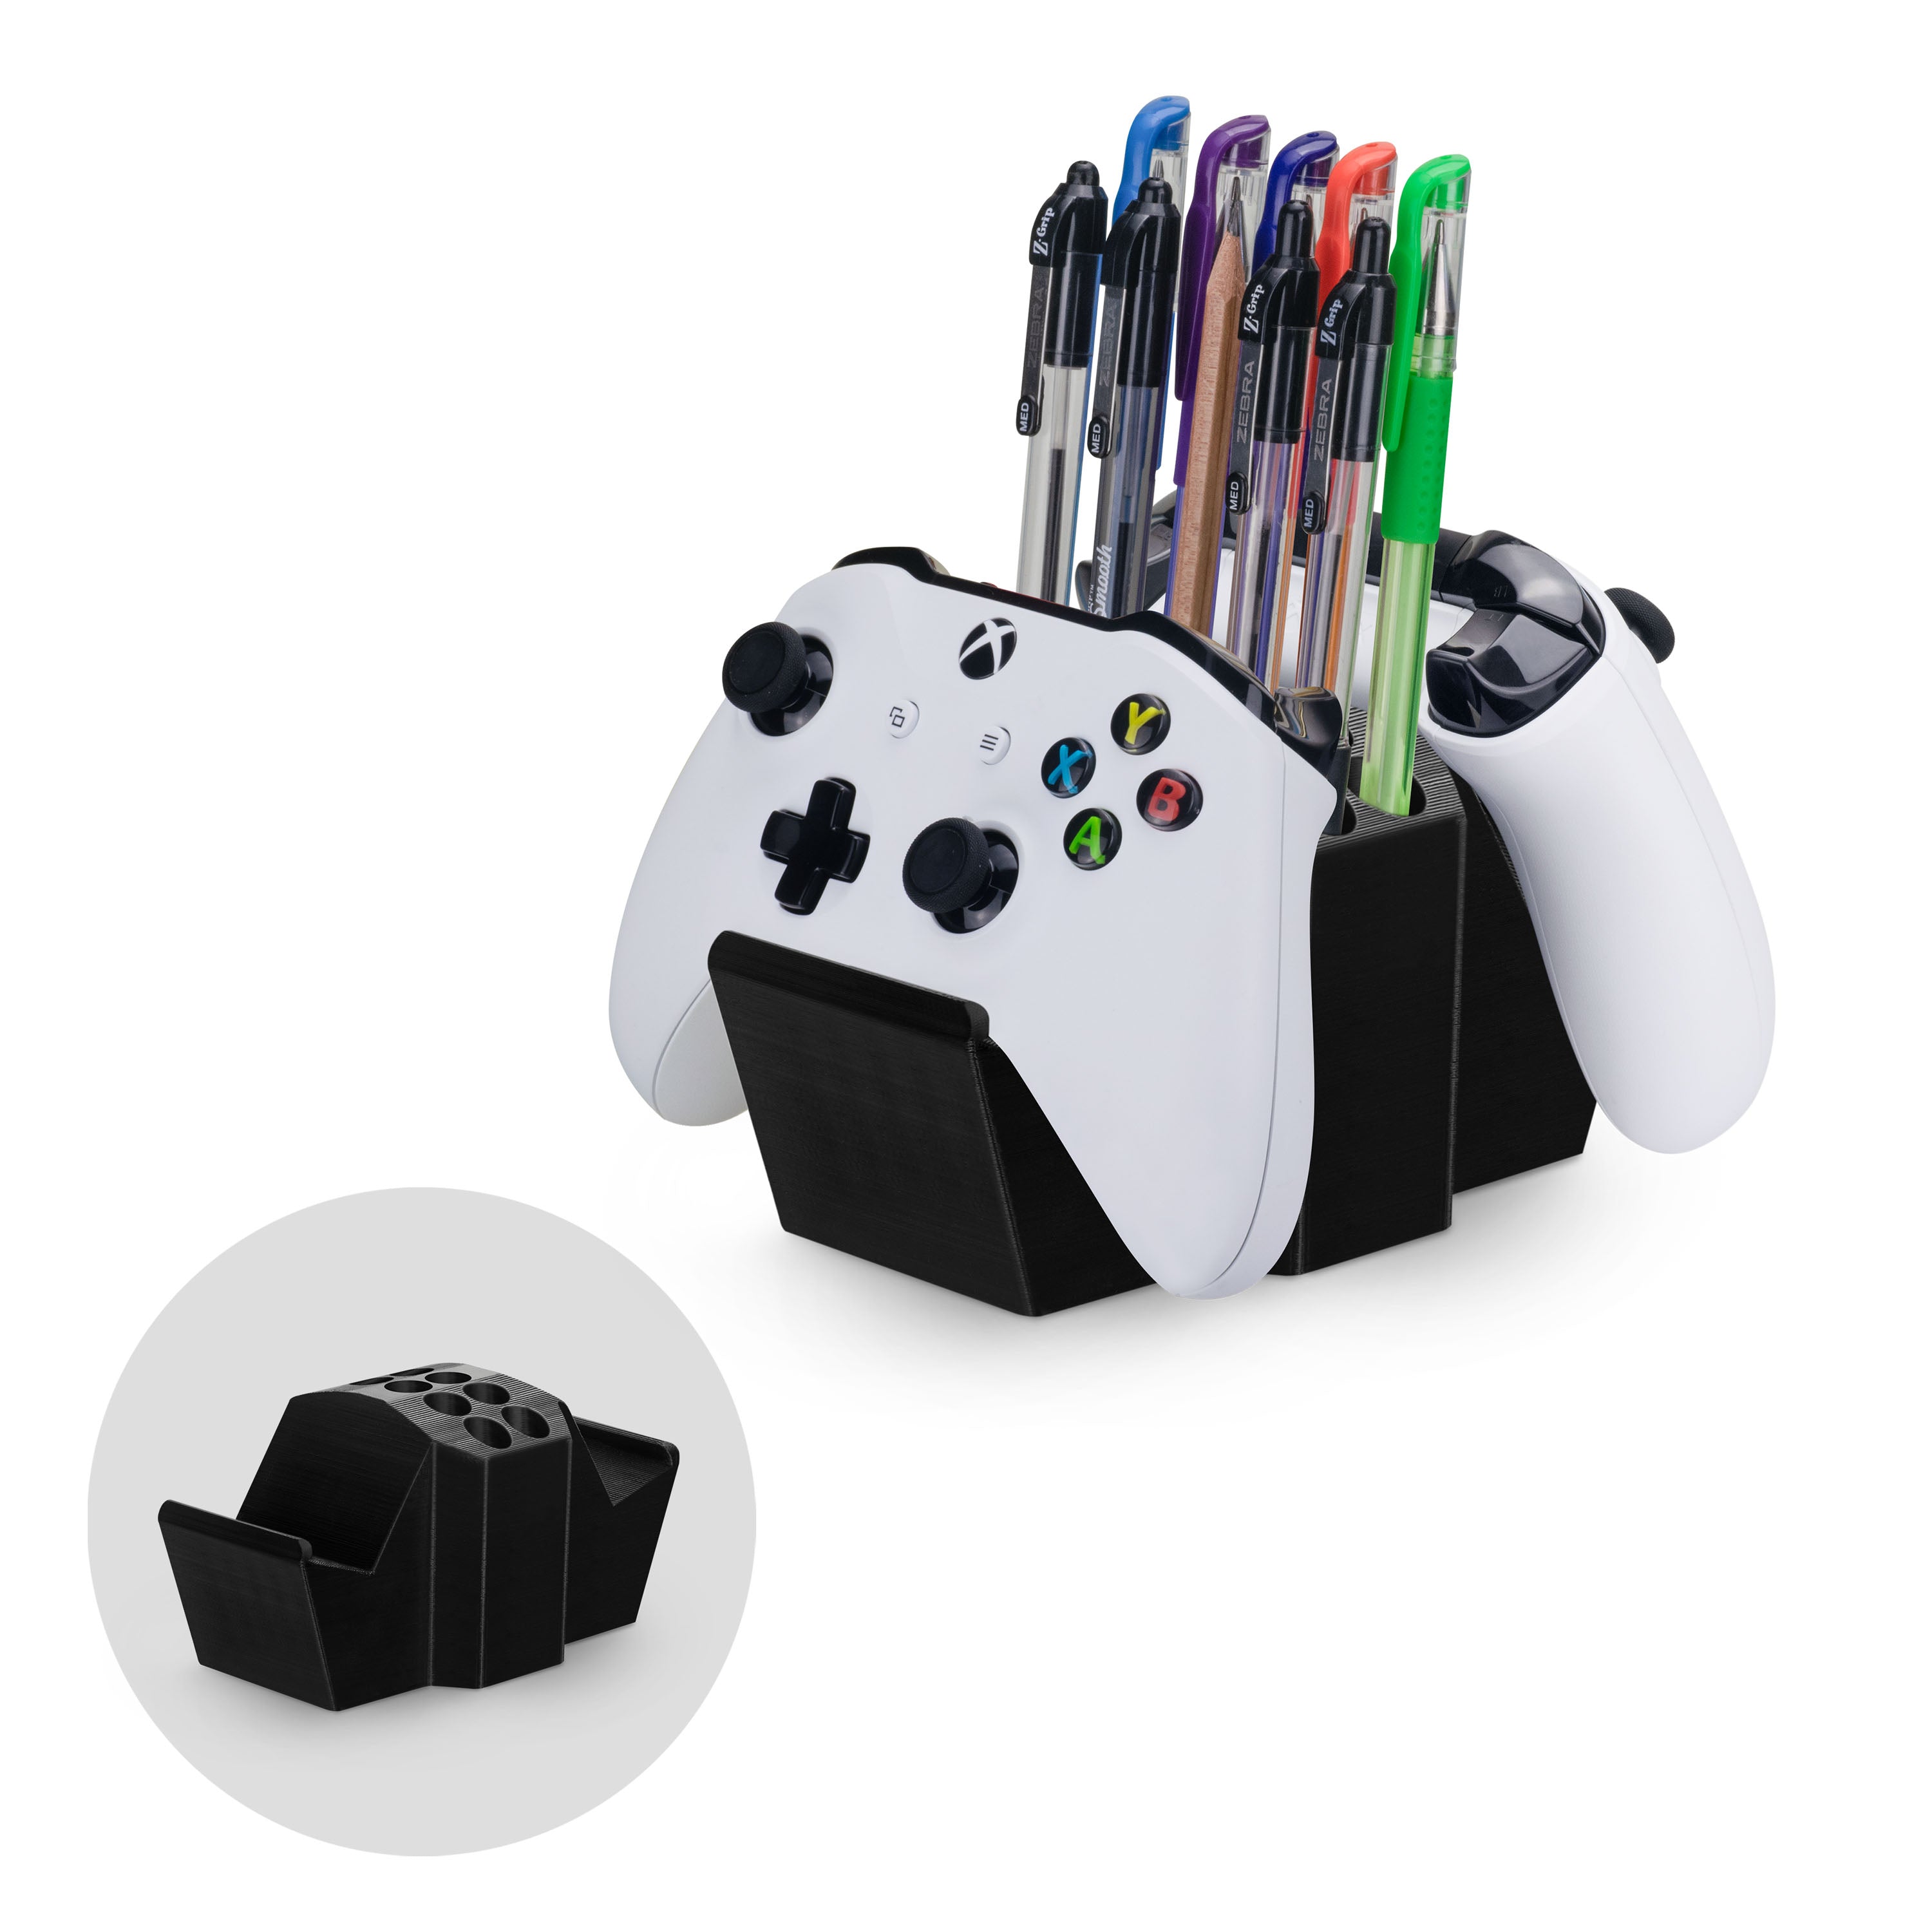 Dual Game Controller & TV Remote Control & Storage Desktop Holder,  Universal Design for Xbox ONE PS5 PS4 PC Gamepads, Reduce Clutter -  Brainwavz Audio